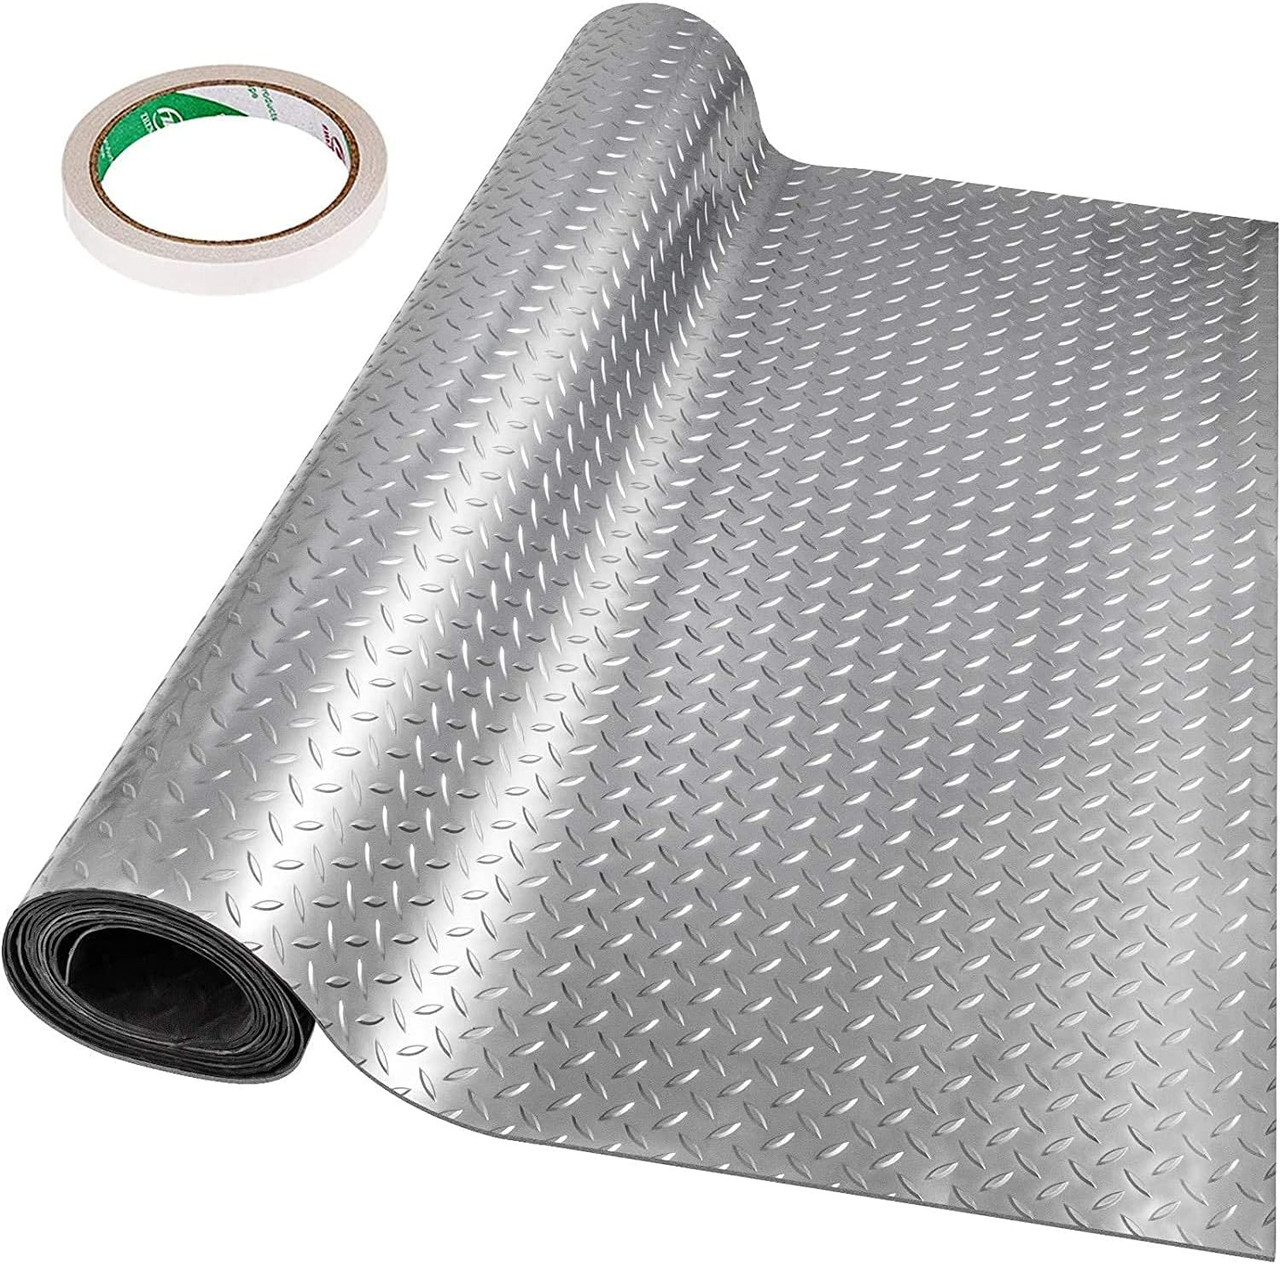 Cooks Innovations the Original Glide Mat - Easily Moving the Small Cou